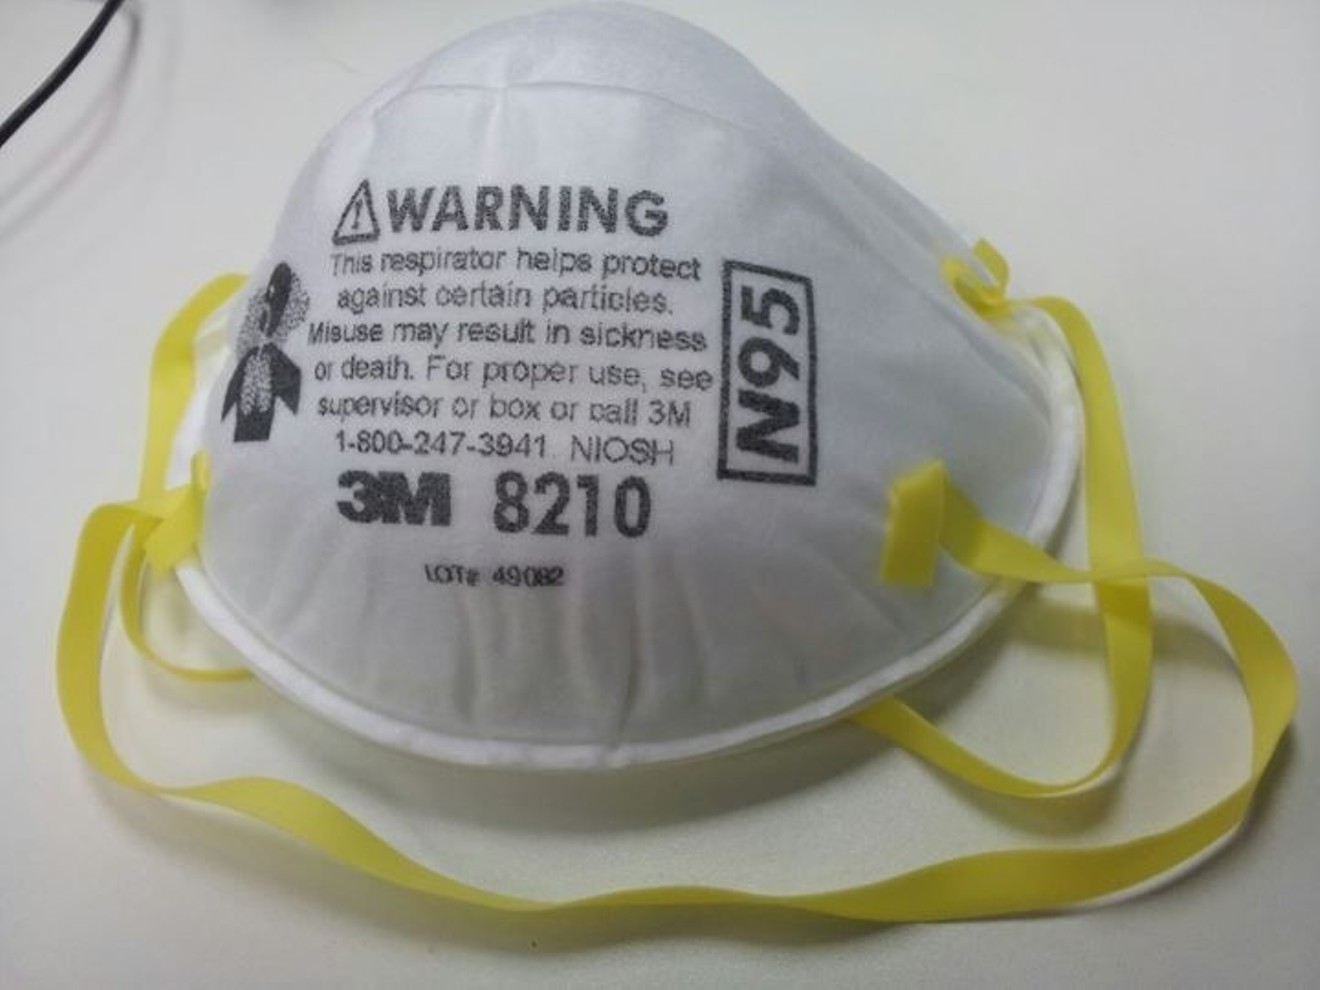 N95 masks are in short supply during the COVID-19 pandemic.